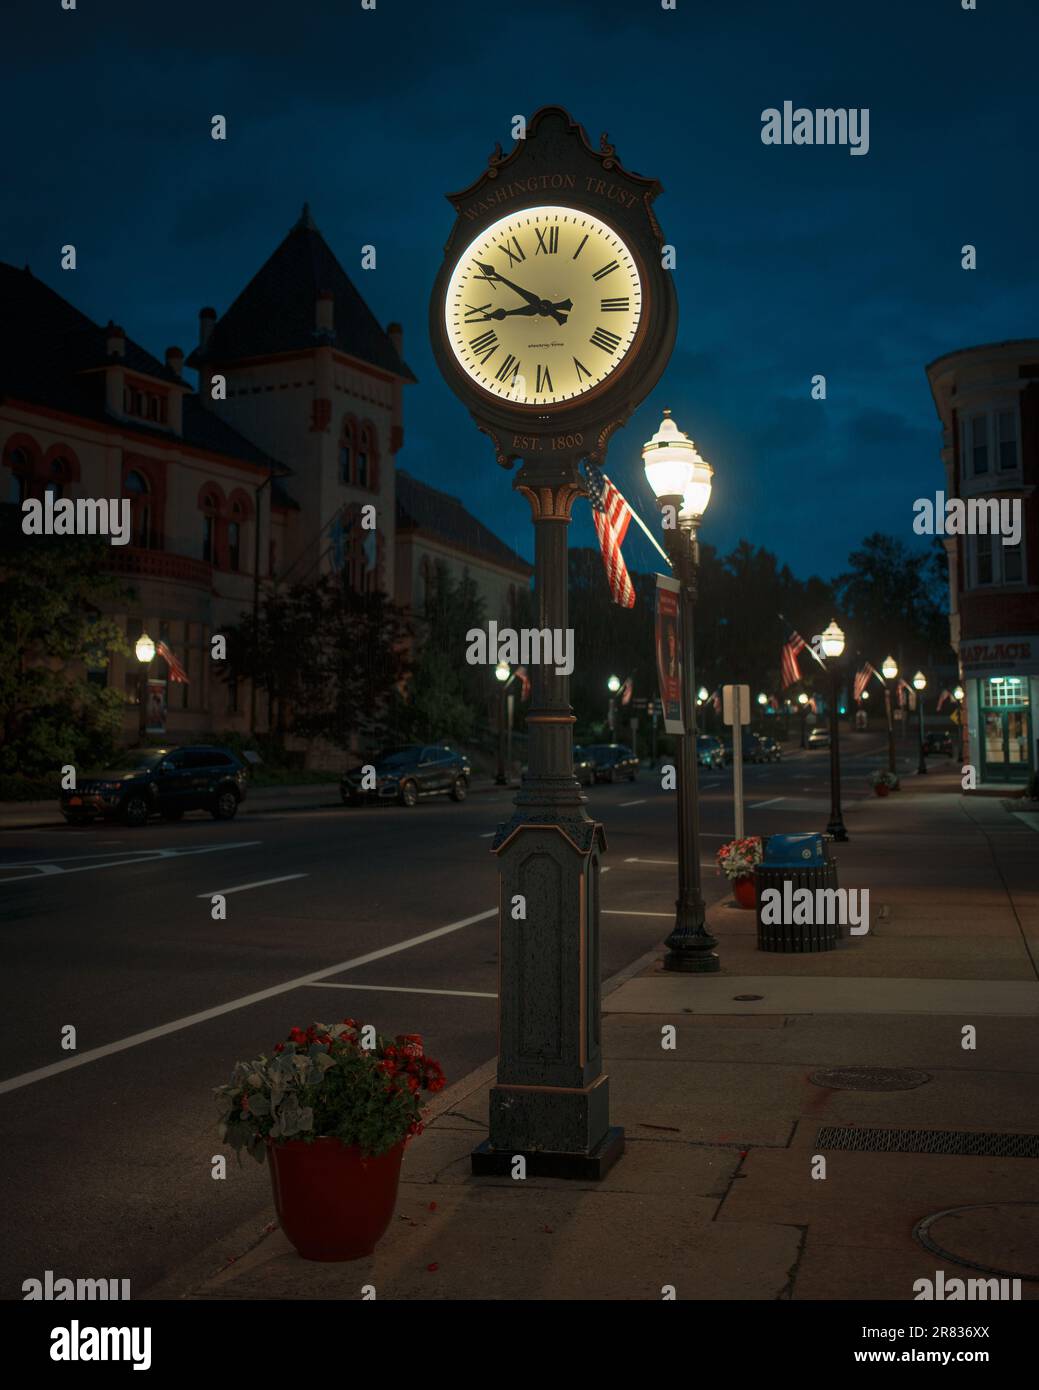 A clock at night in downtown Westerly, Rhode Island Stock Photo